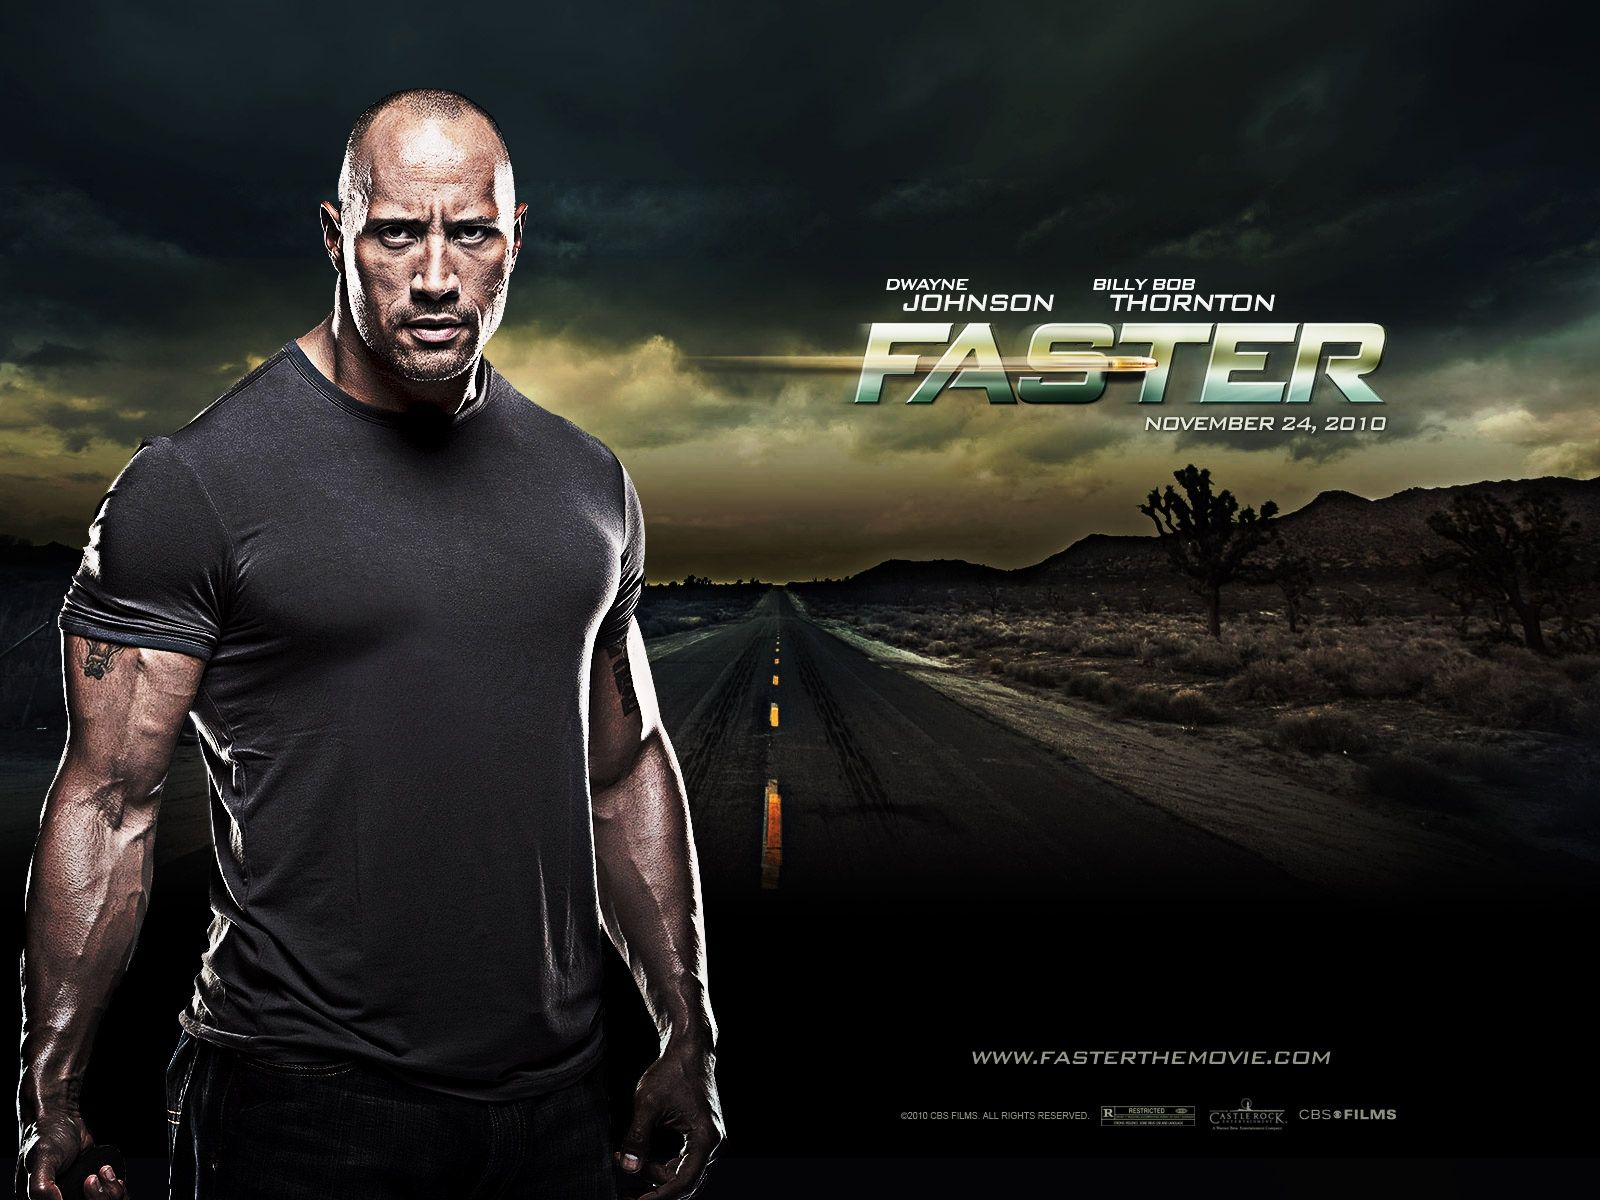 Gallery for - faster movie wallpaper